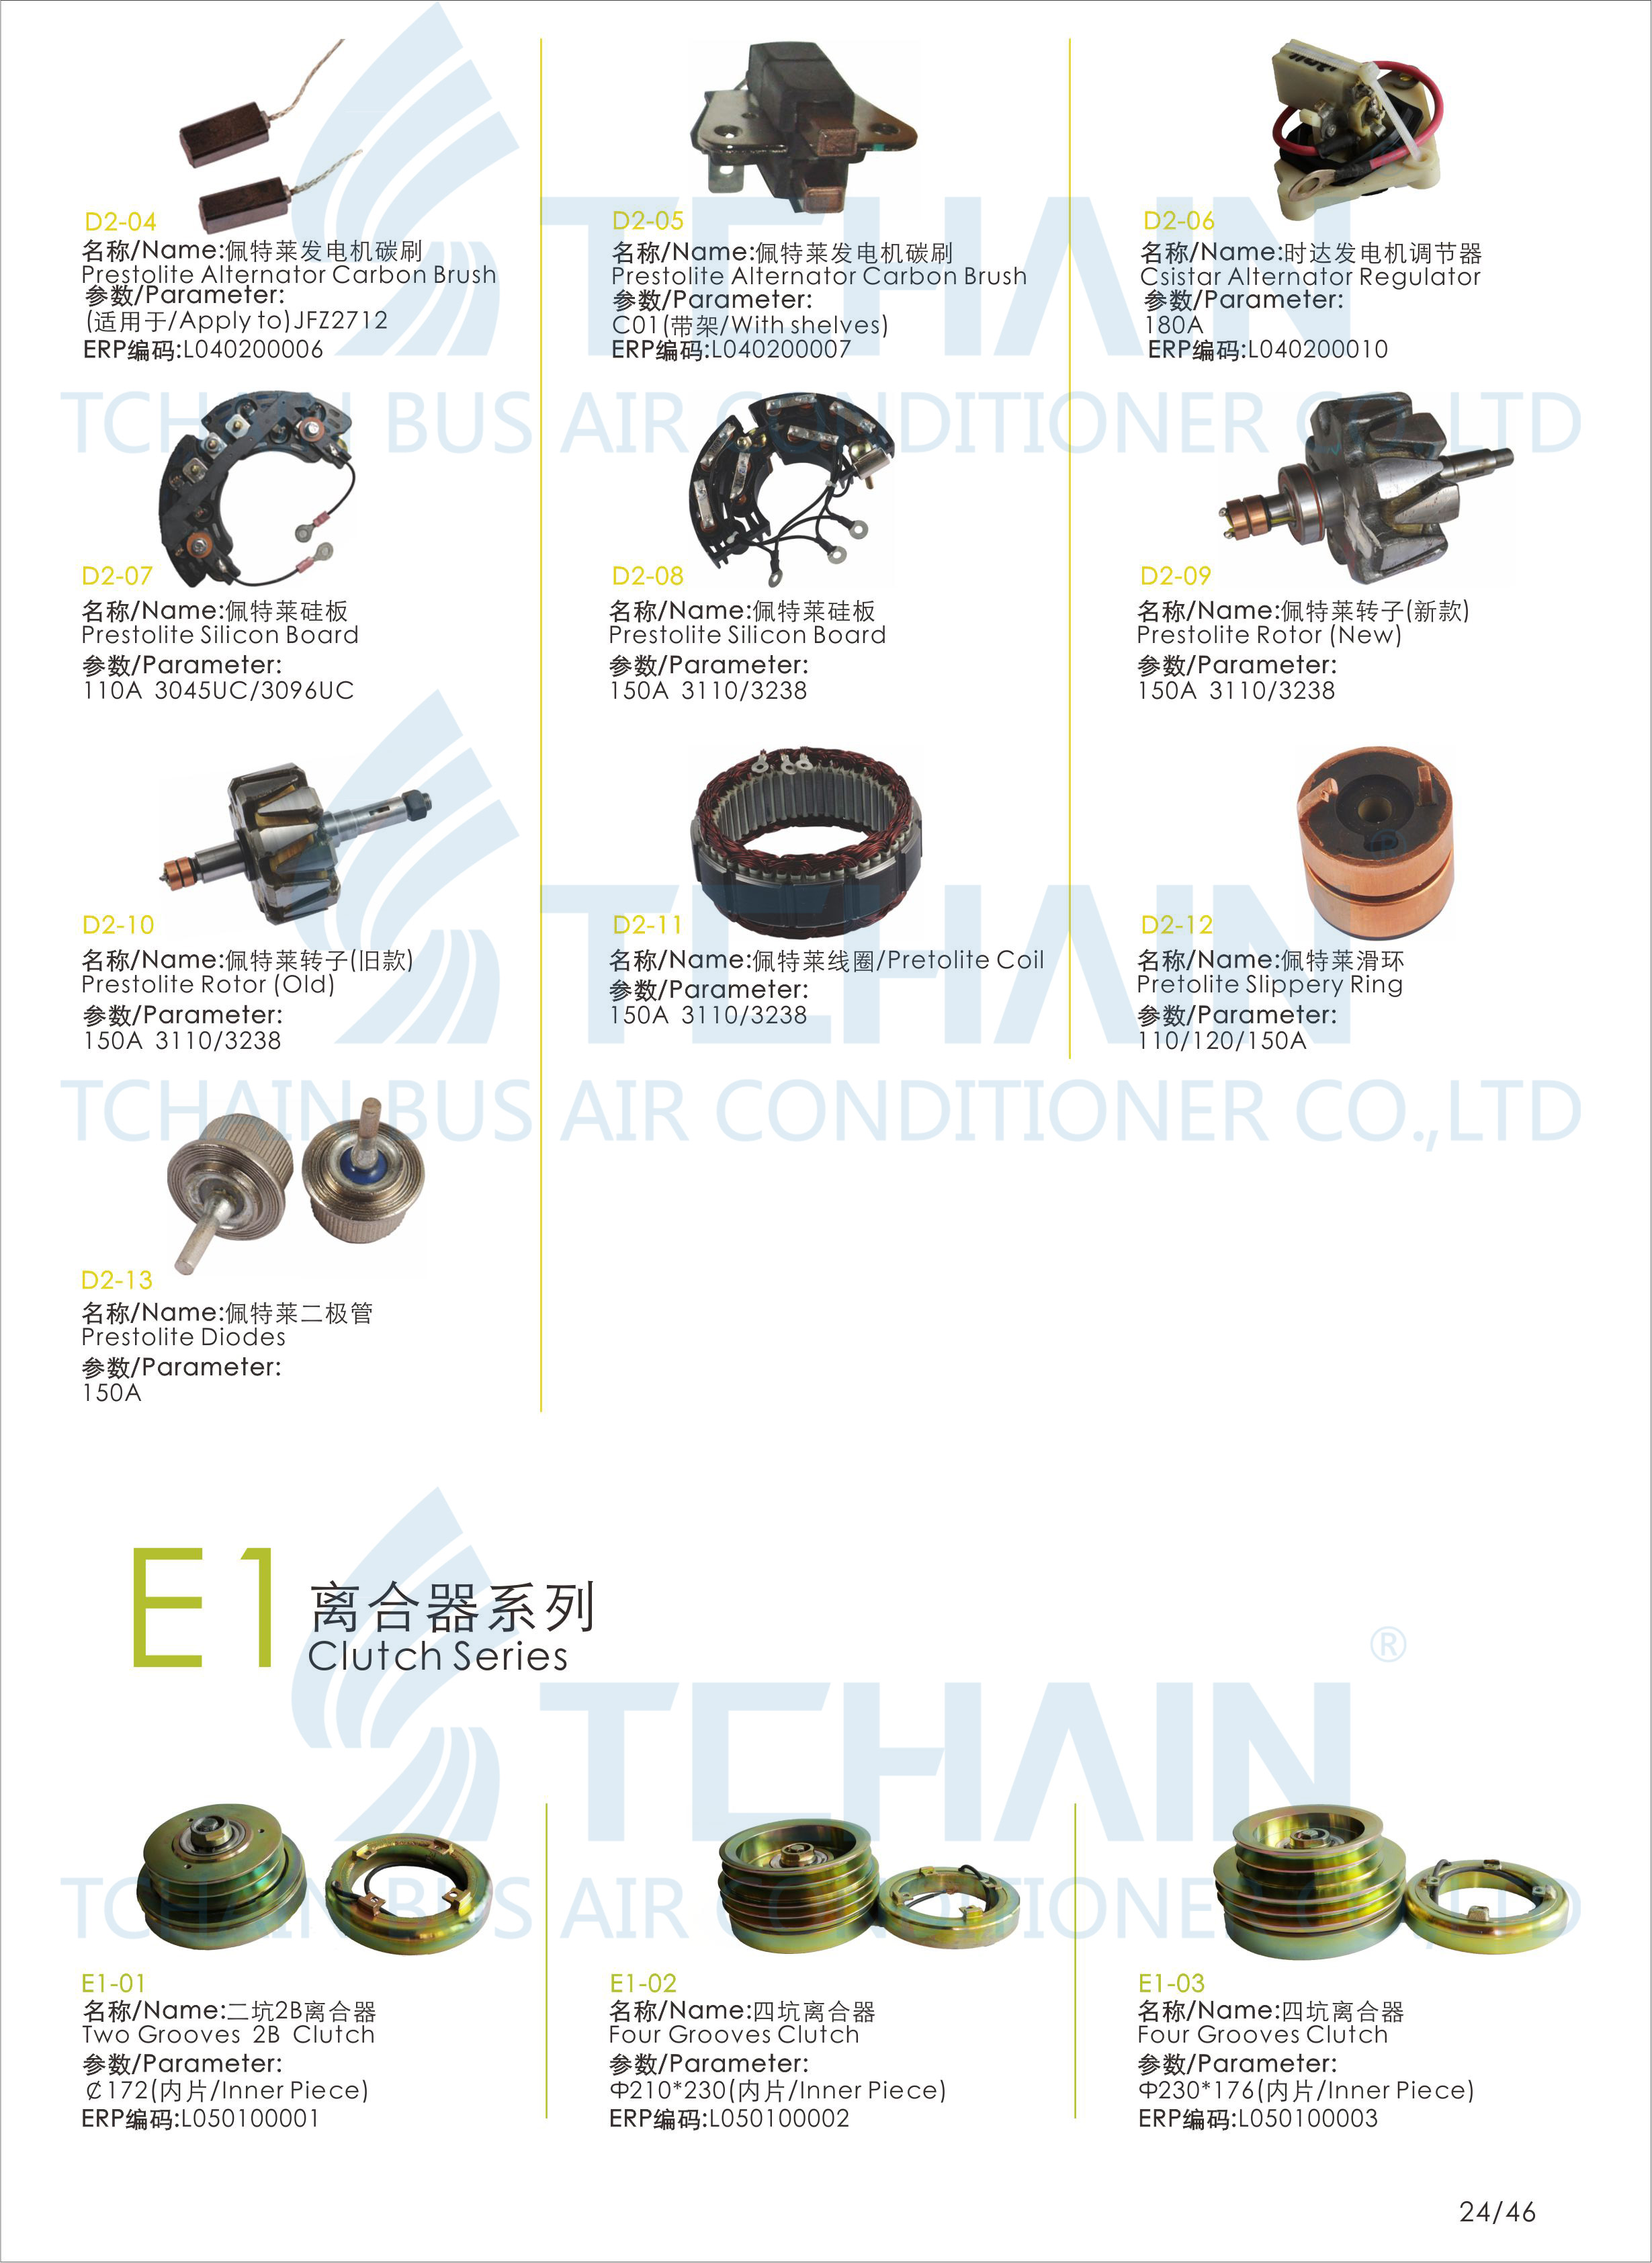 A/C Compressor Clutch 2A2B 2B Bus Air Conditioner buses Air Conditioning Spare Parts